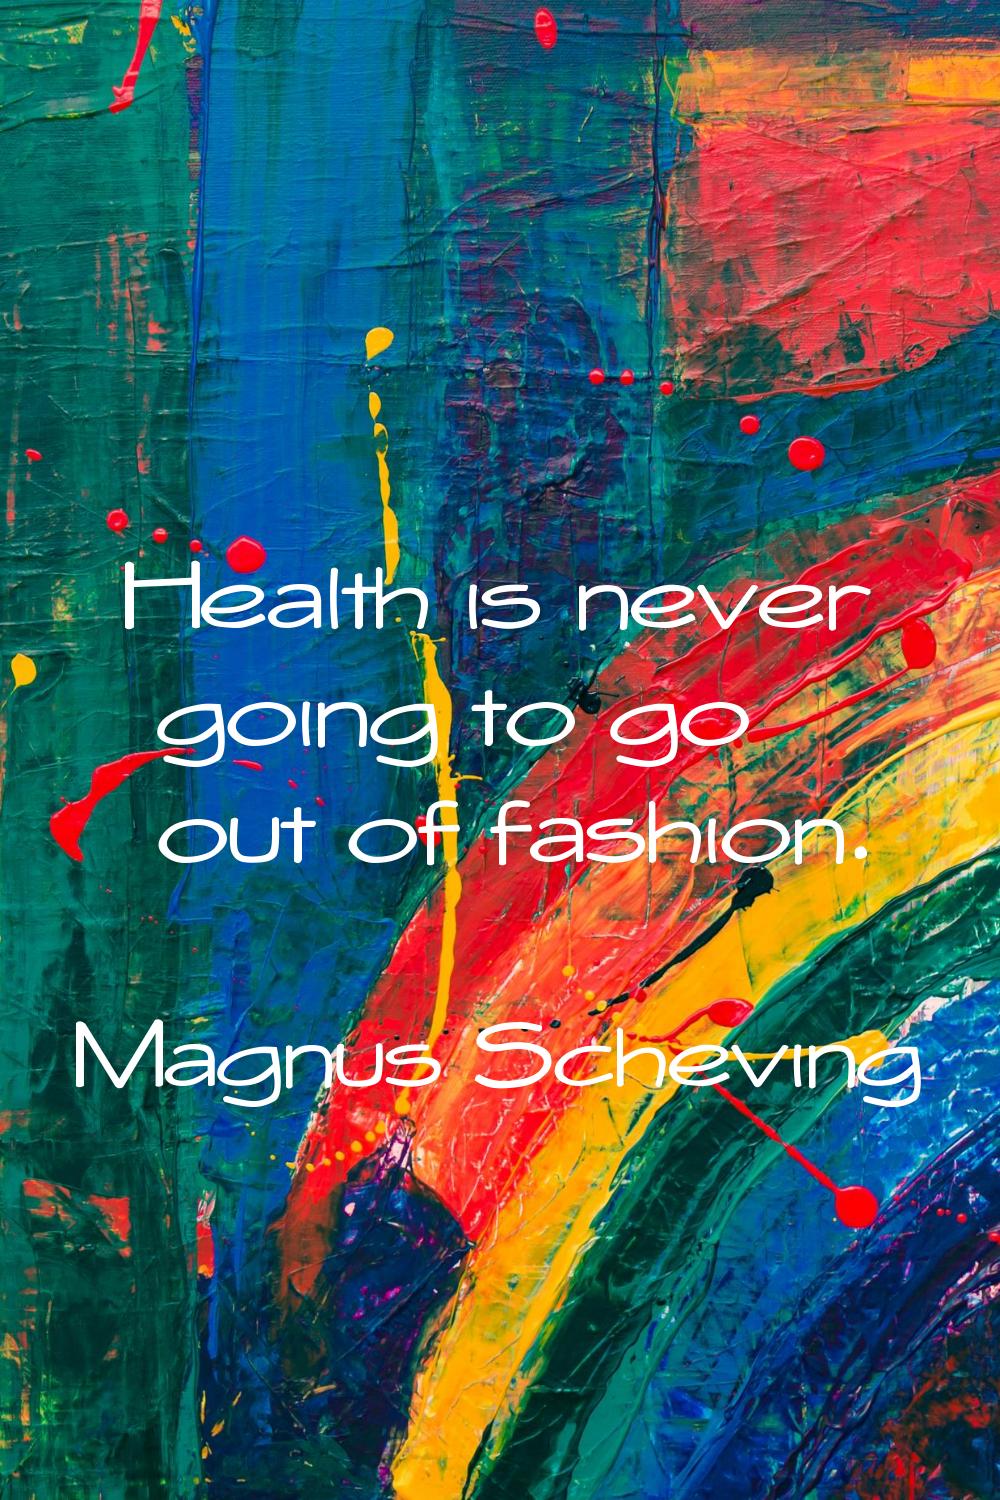 Health is never going to go out of fashion.